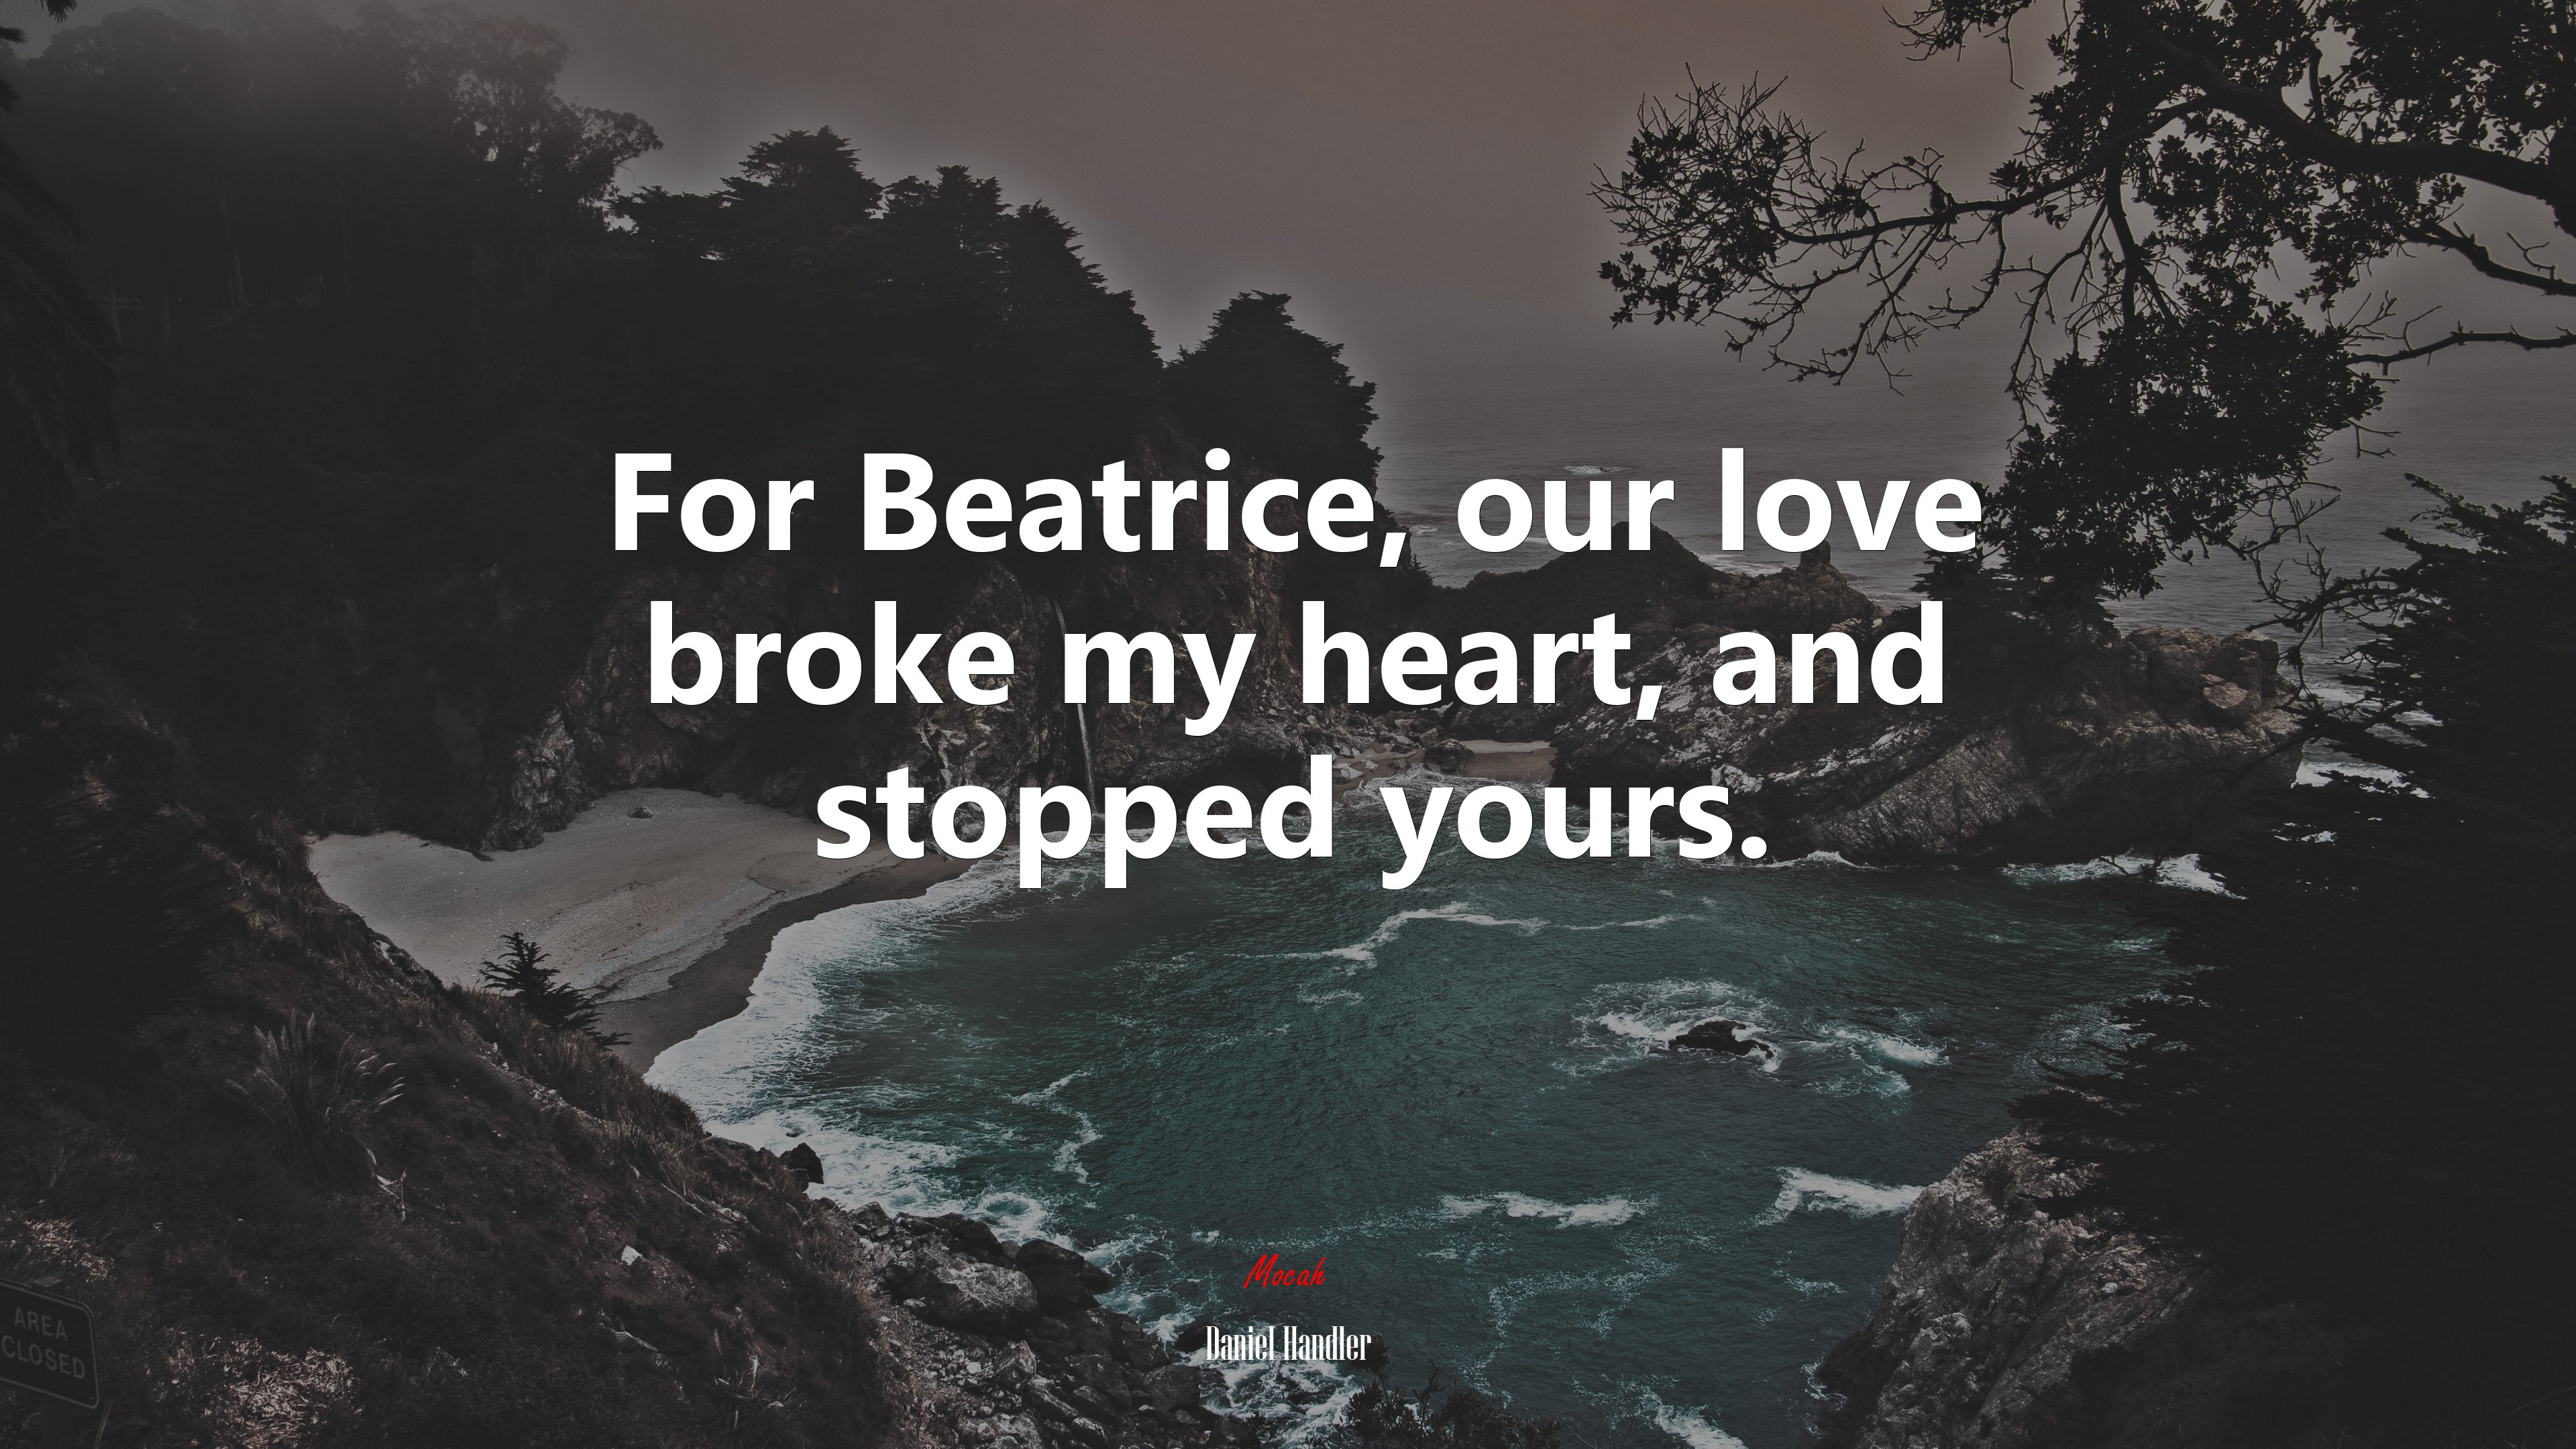 For beatrice our love broke my heart and stopped yours daniel handler quote